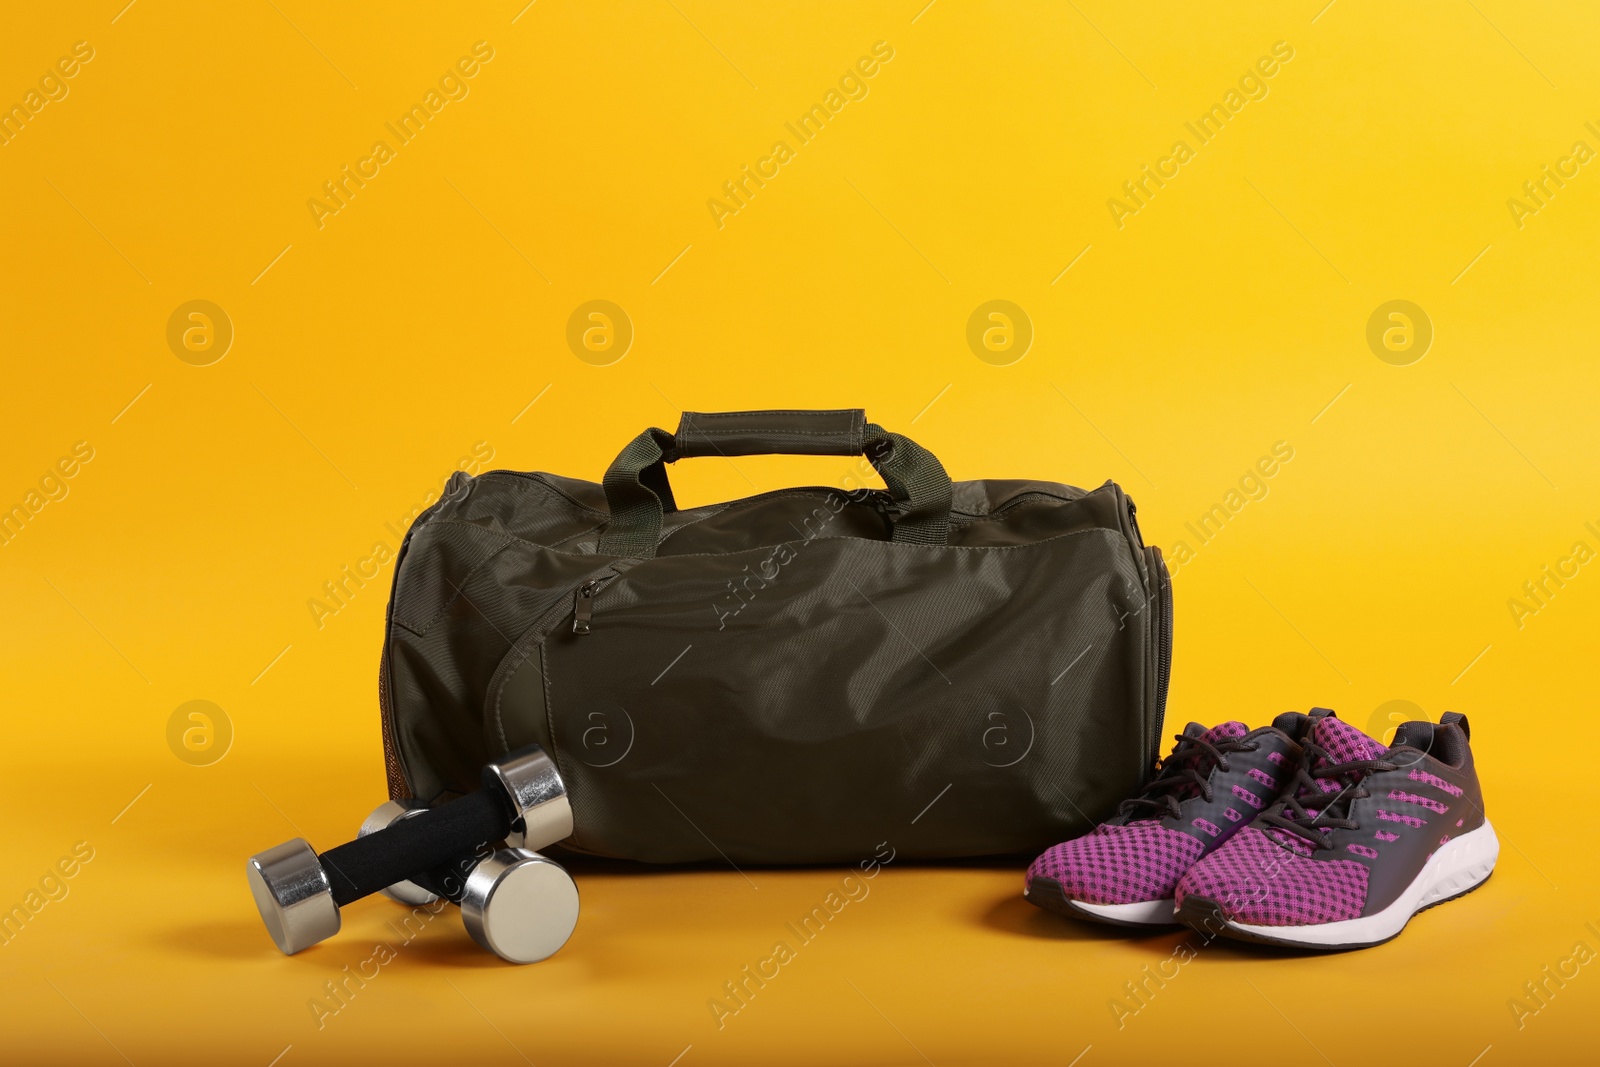 Photo of Sports bag and gym equipment on yellow background